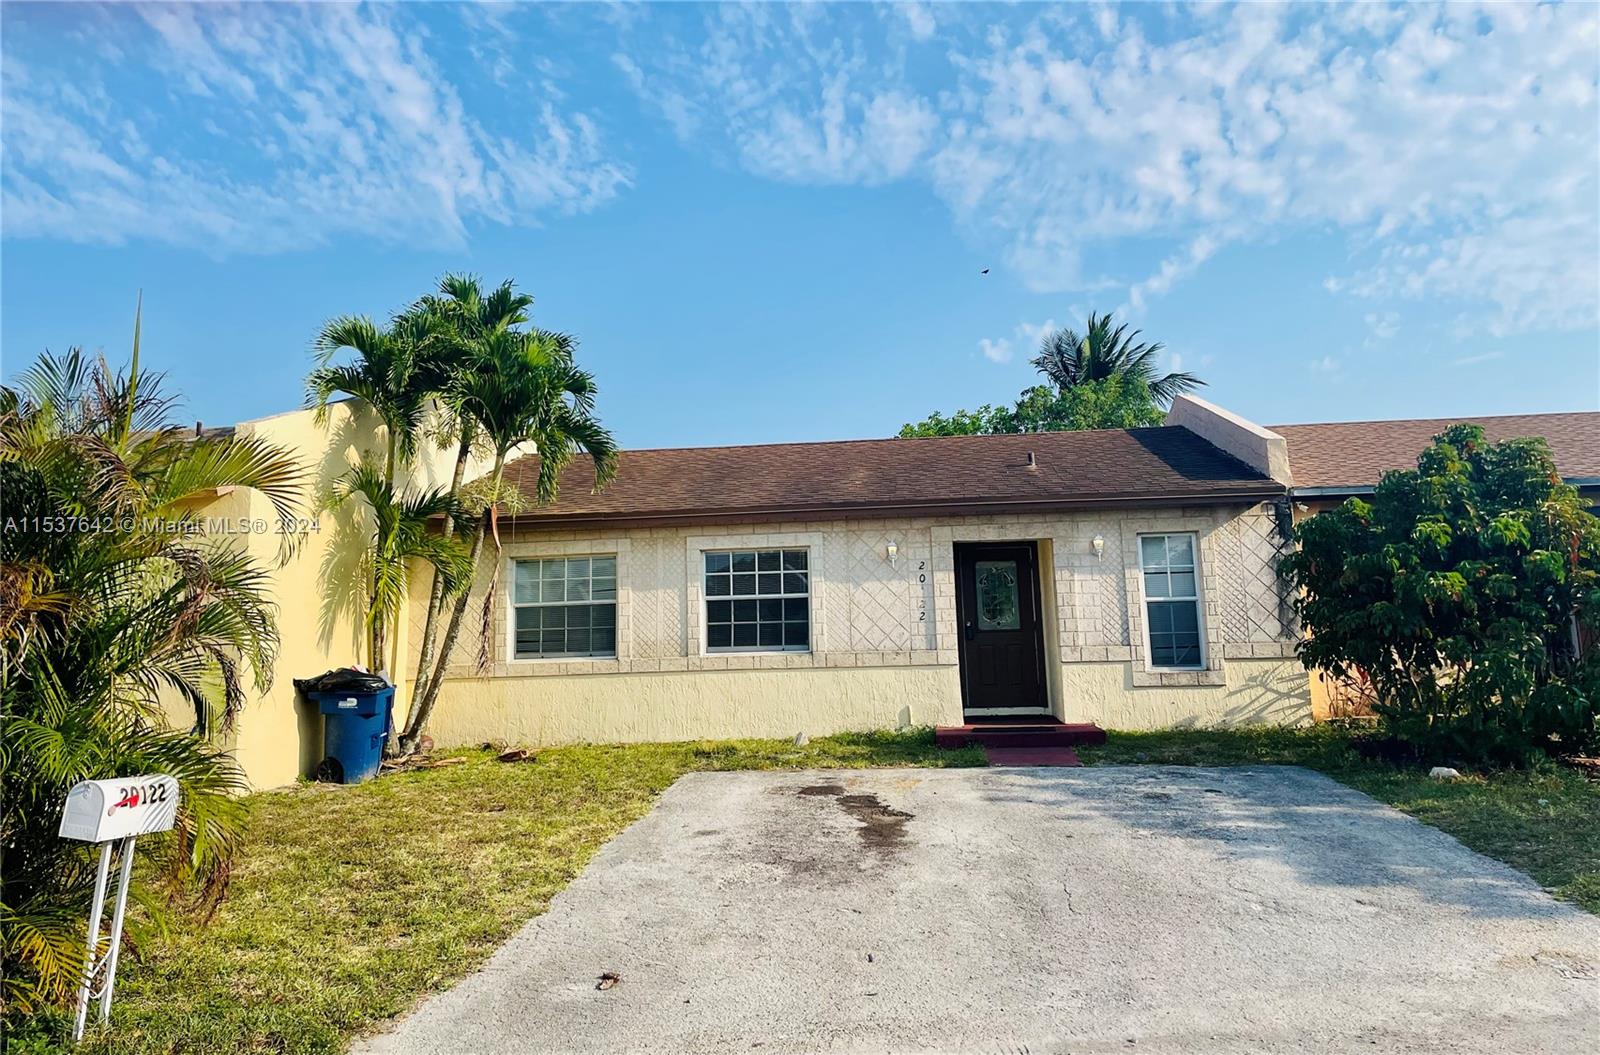 Property for Sale at 20122 Nw 28th Ct Ct, Miami Gardens, Broward County, Florida - Bedrooms: 3 
Bathrooms: 1  - $355,556